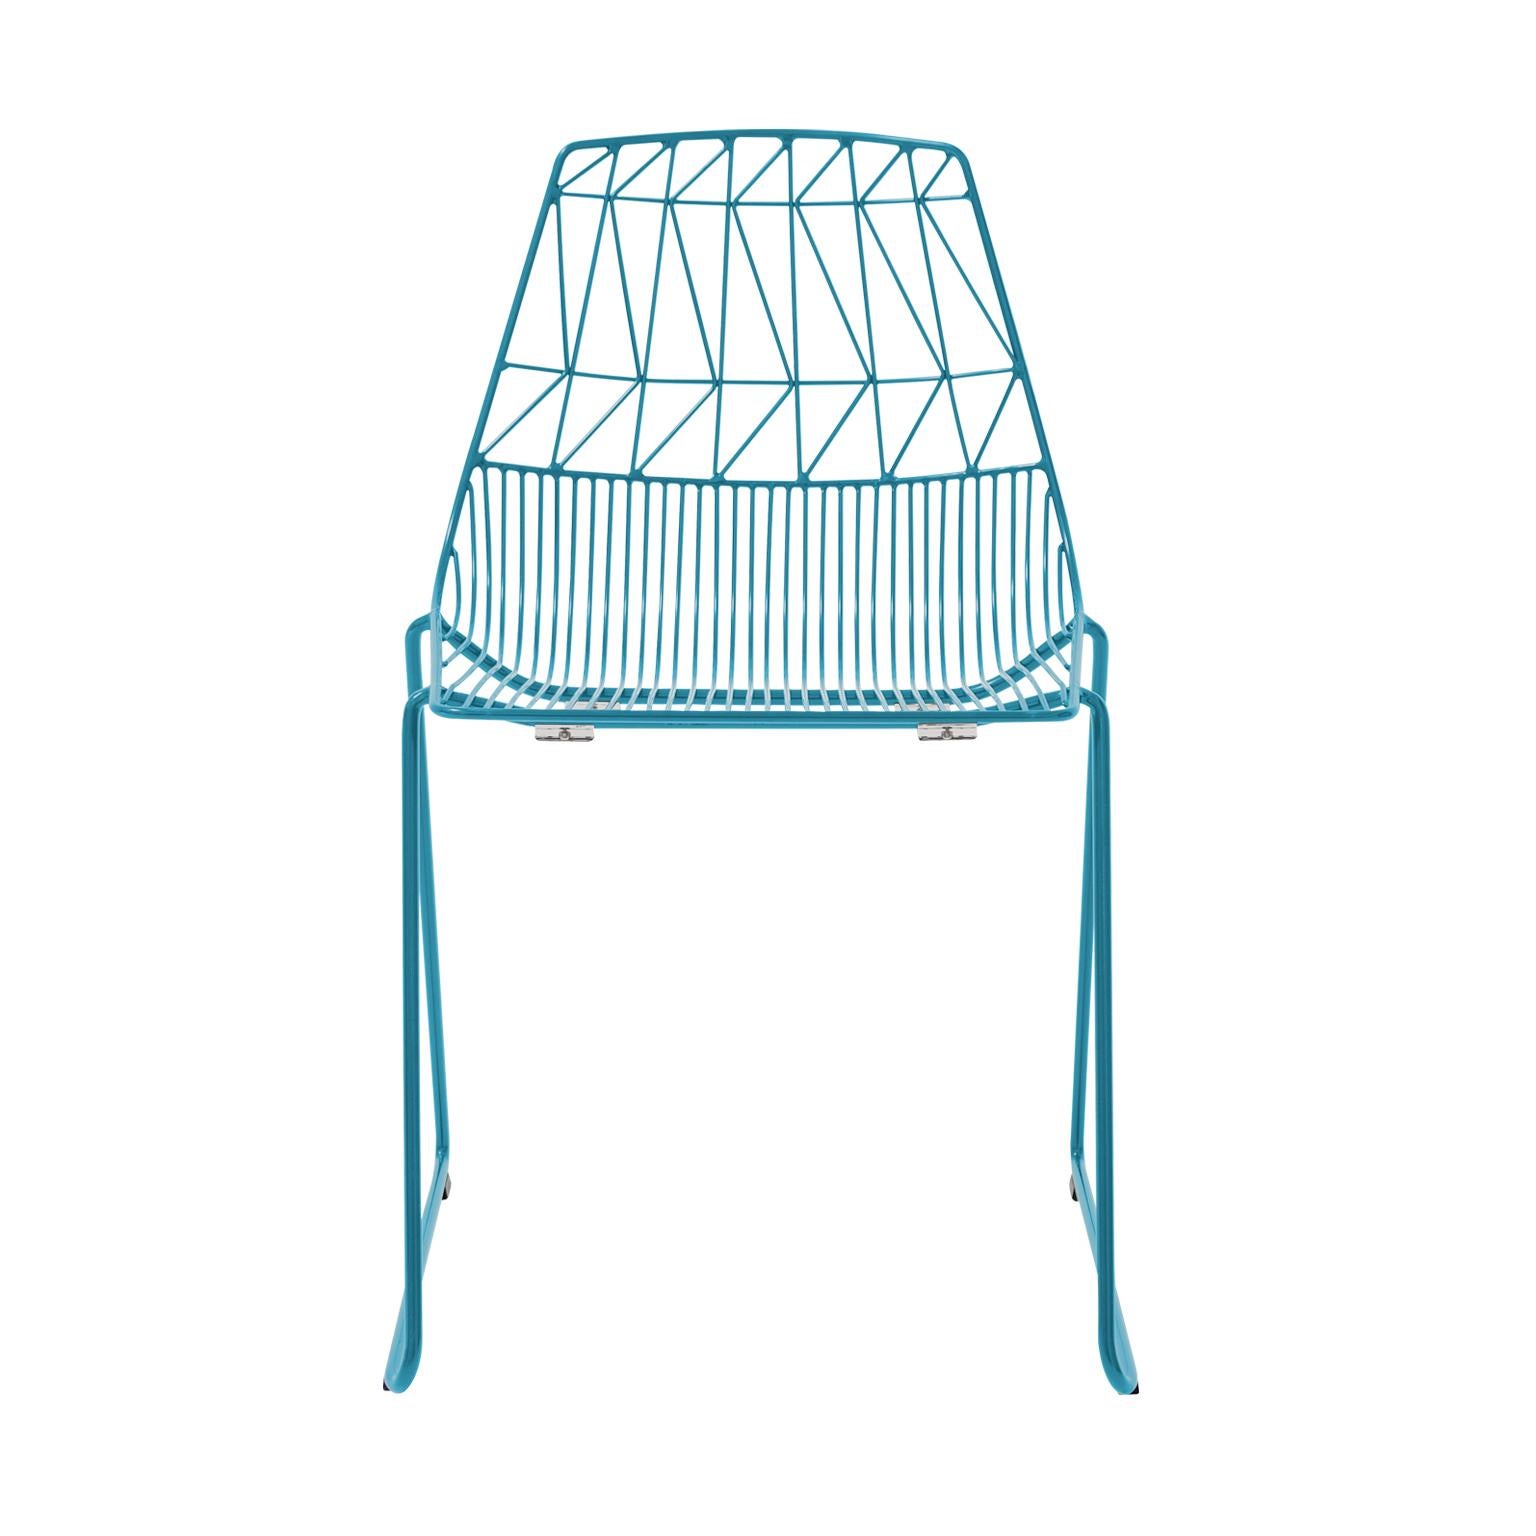 Bend Goods wire furniture
A Classic wire dining chair, the stacking Lucy chair combines versatility with Mid-Century Modern wire design. Great for outdoor commercial seating with the ability to stack up to 6 chairs for easy storage.